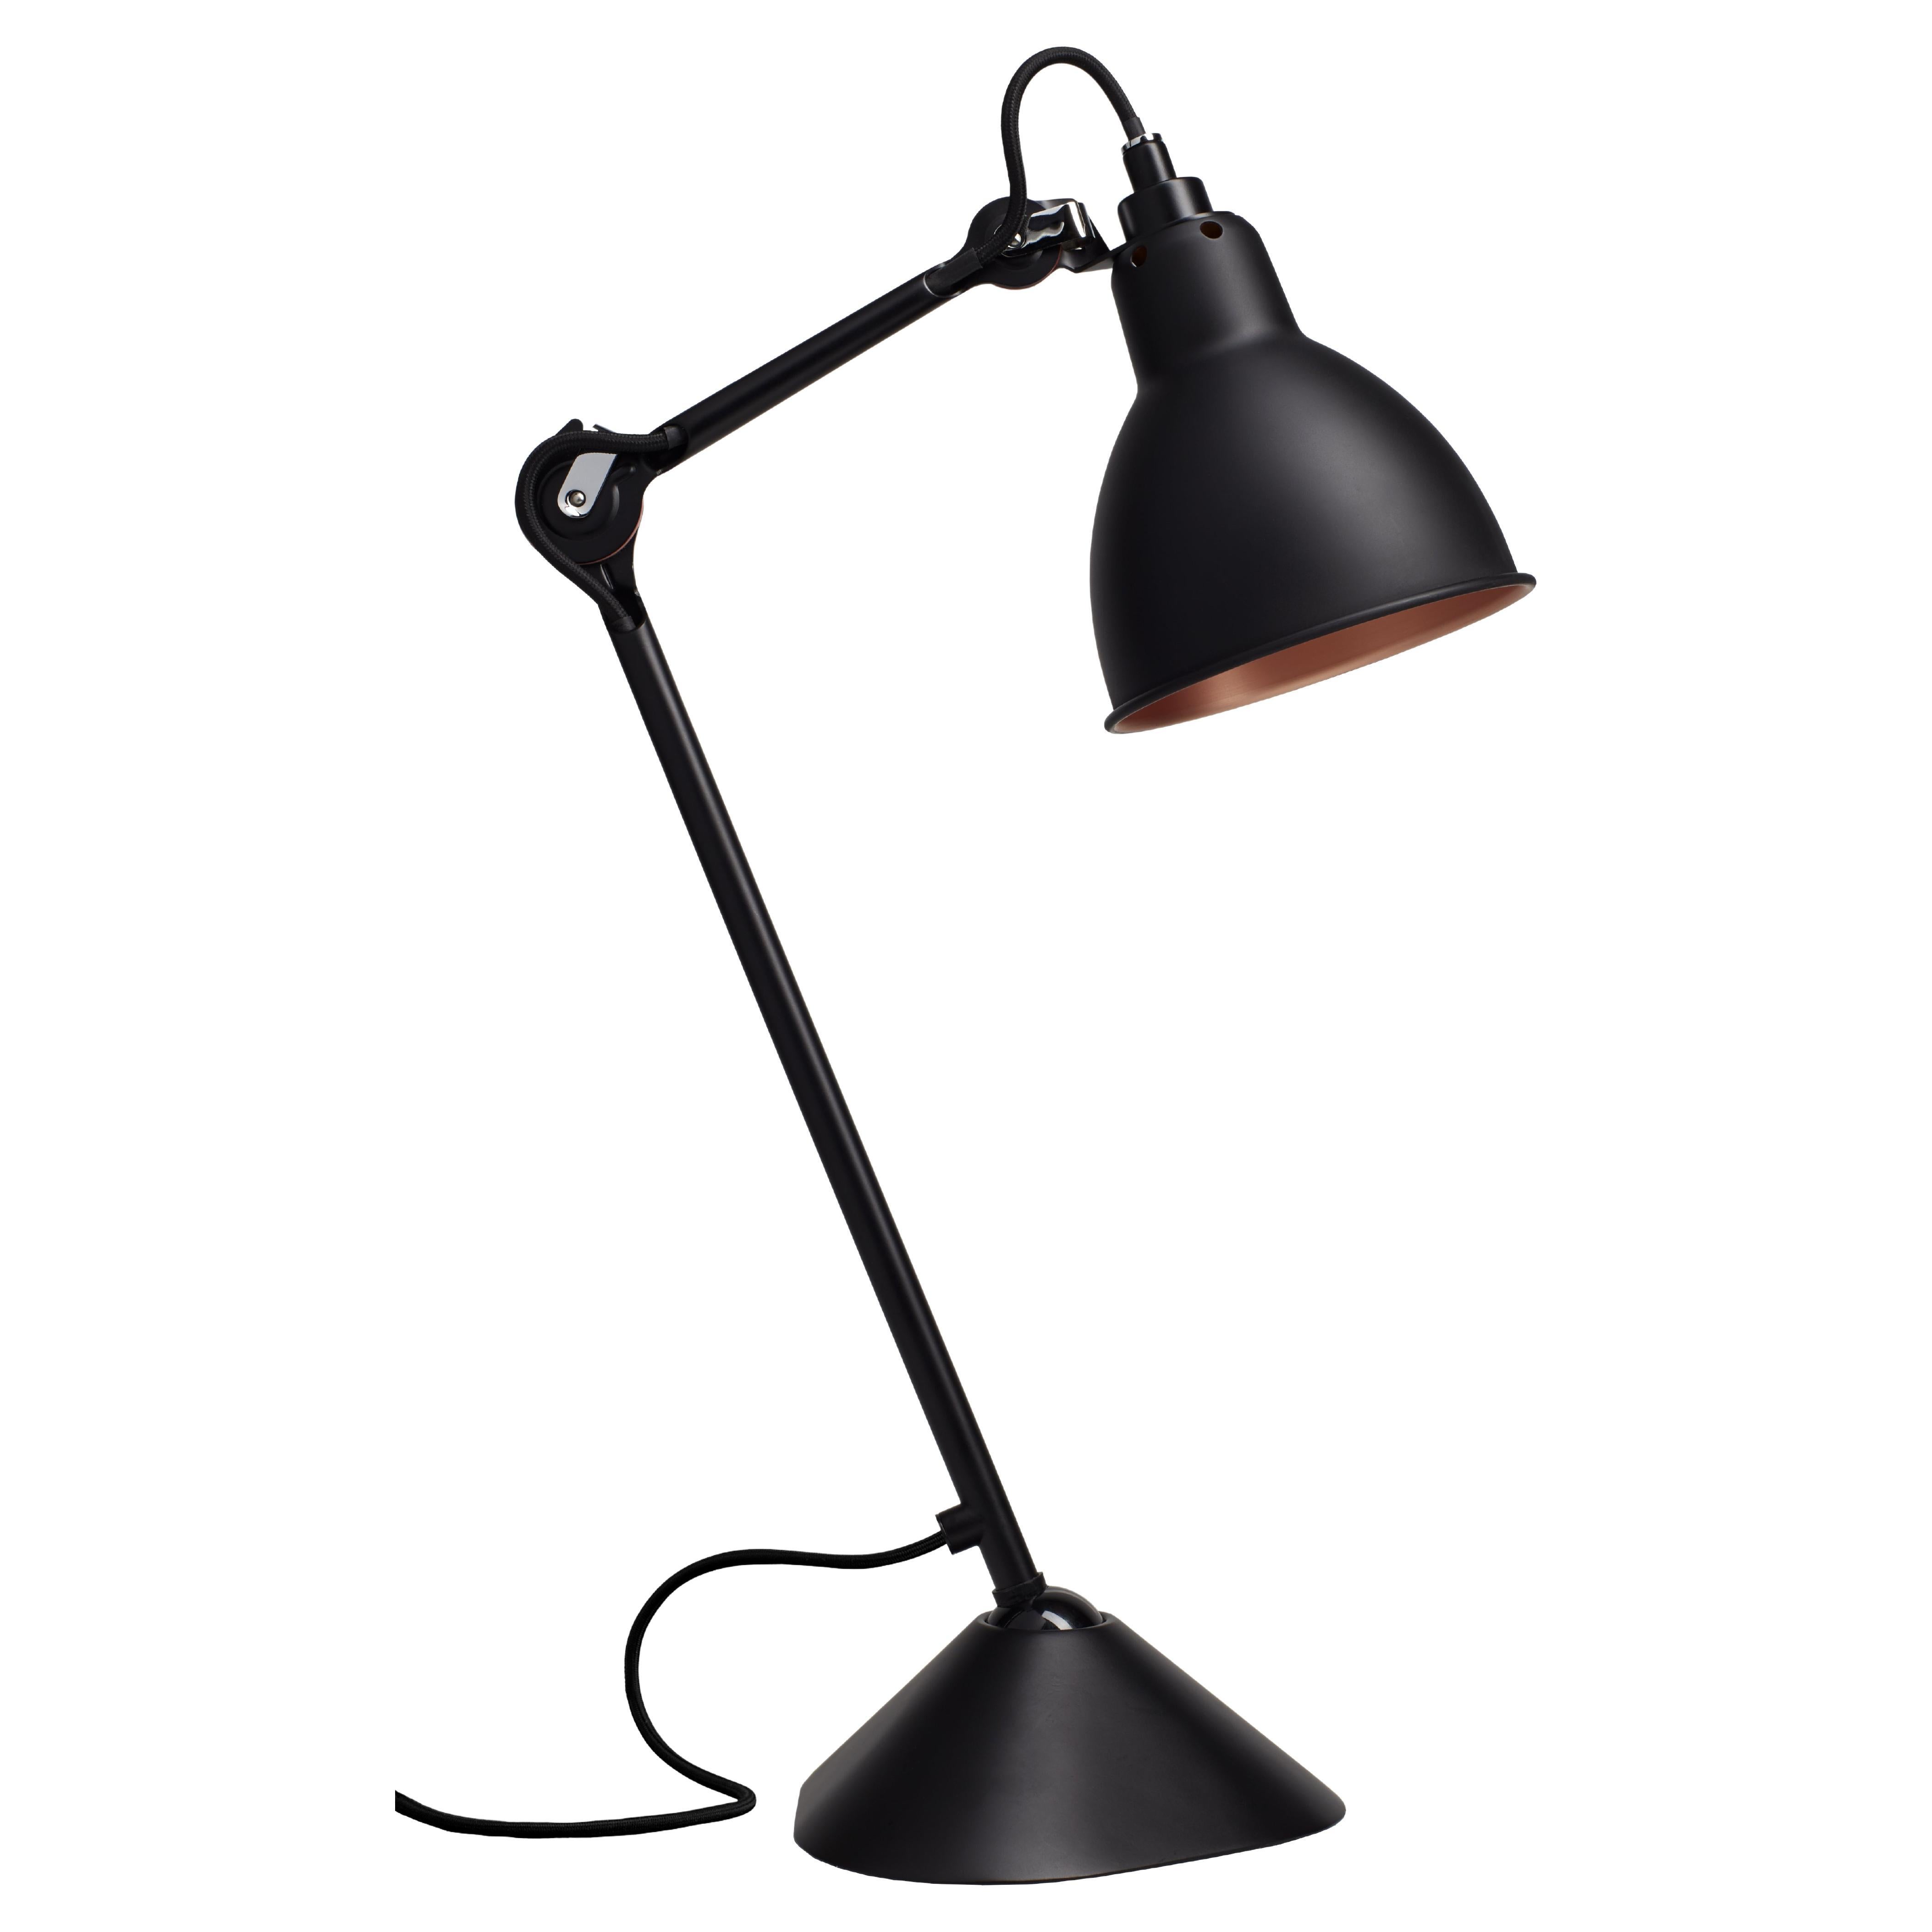 DCW Editions La Lampe Gras N°205 Table Lamp in Black Arm with Black Copper Shade